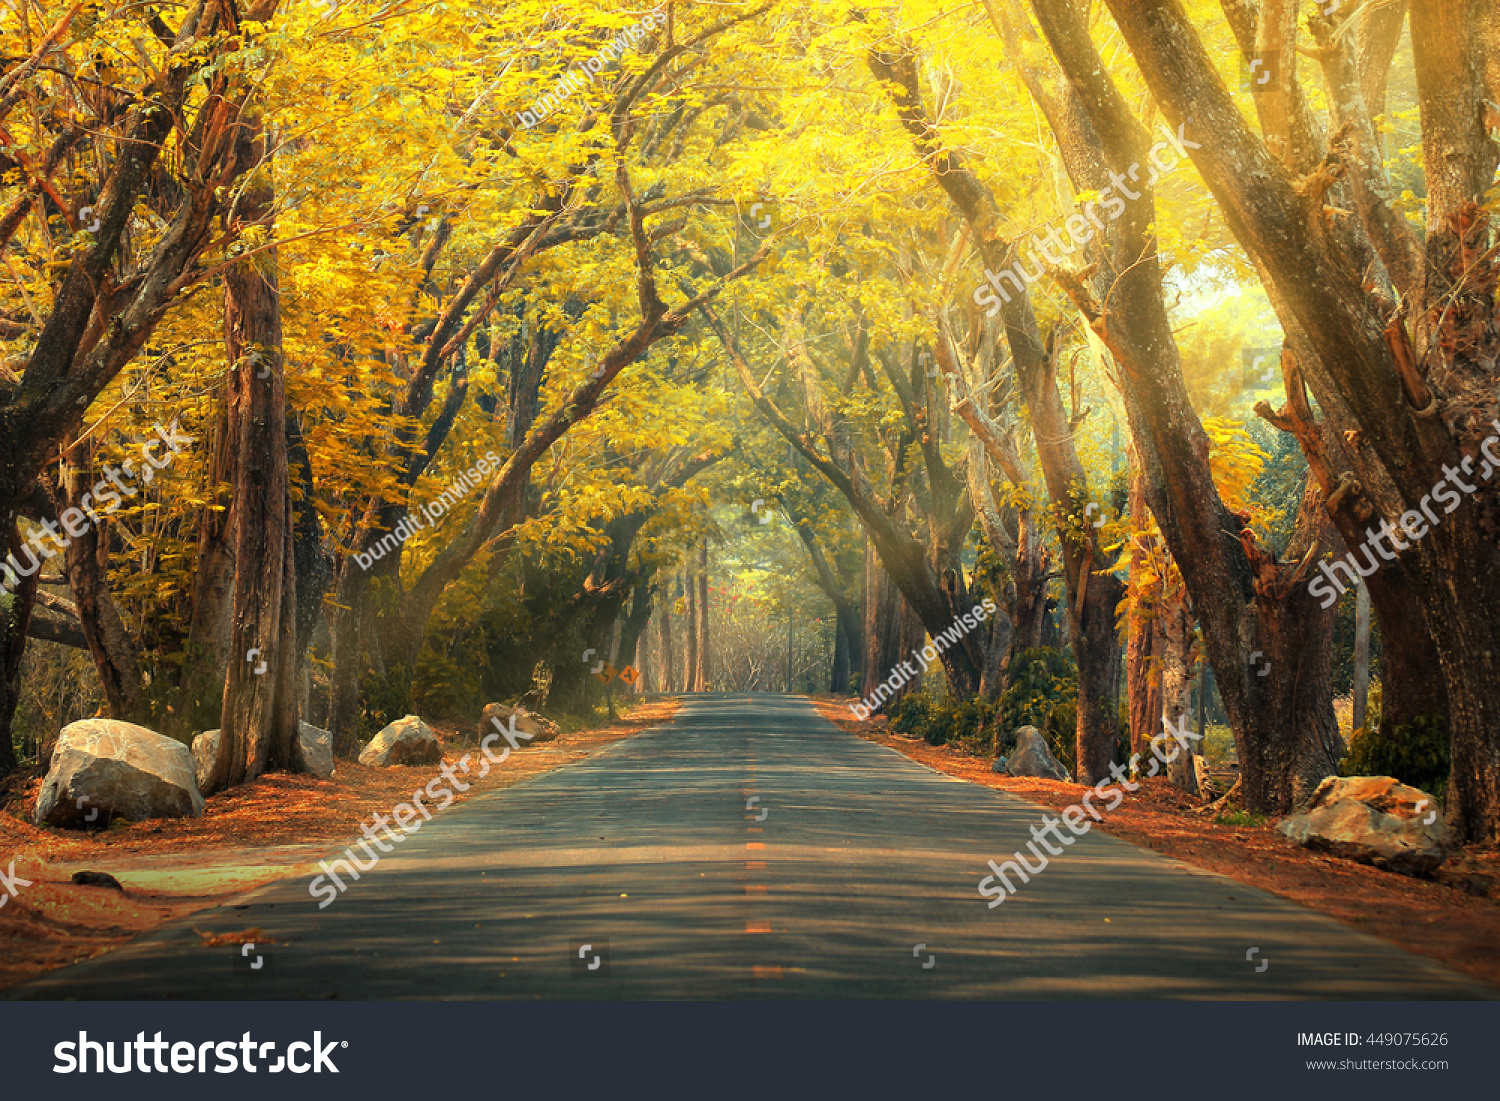 Abstract Background Route Journey Amidst Big Stock Photo 449075626